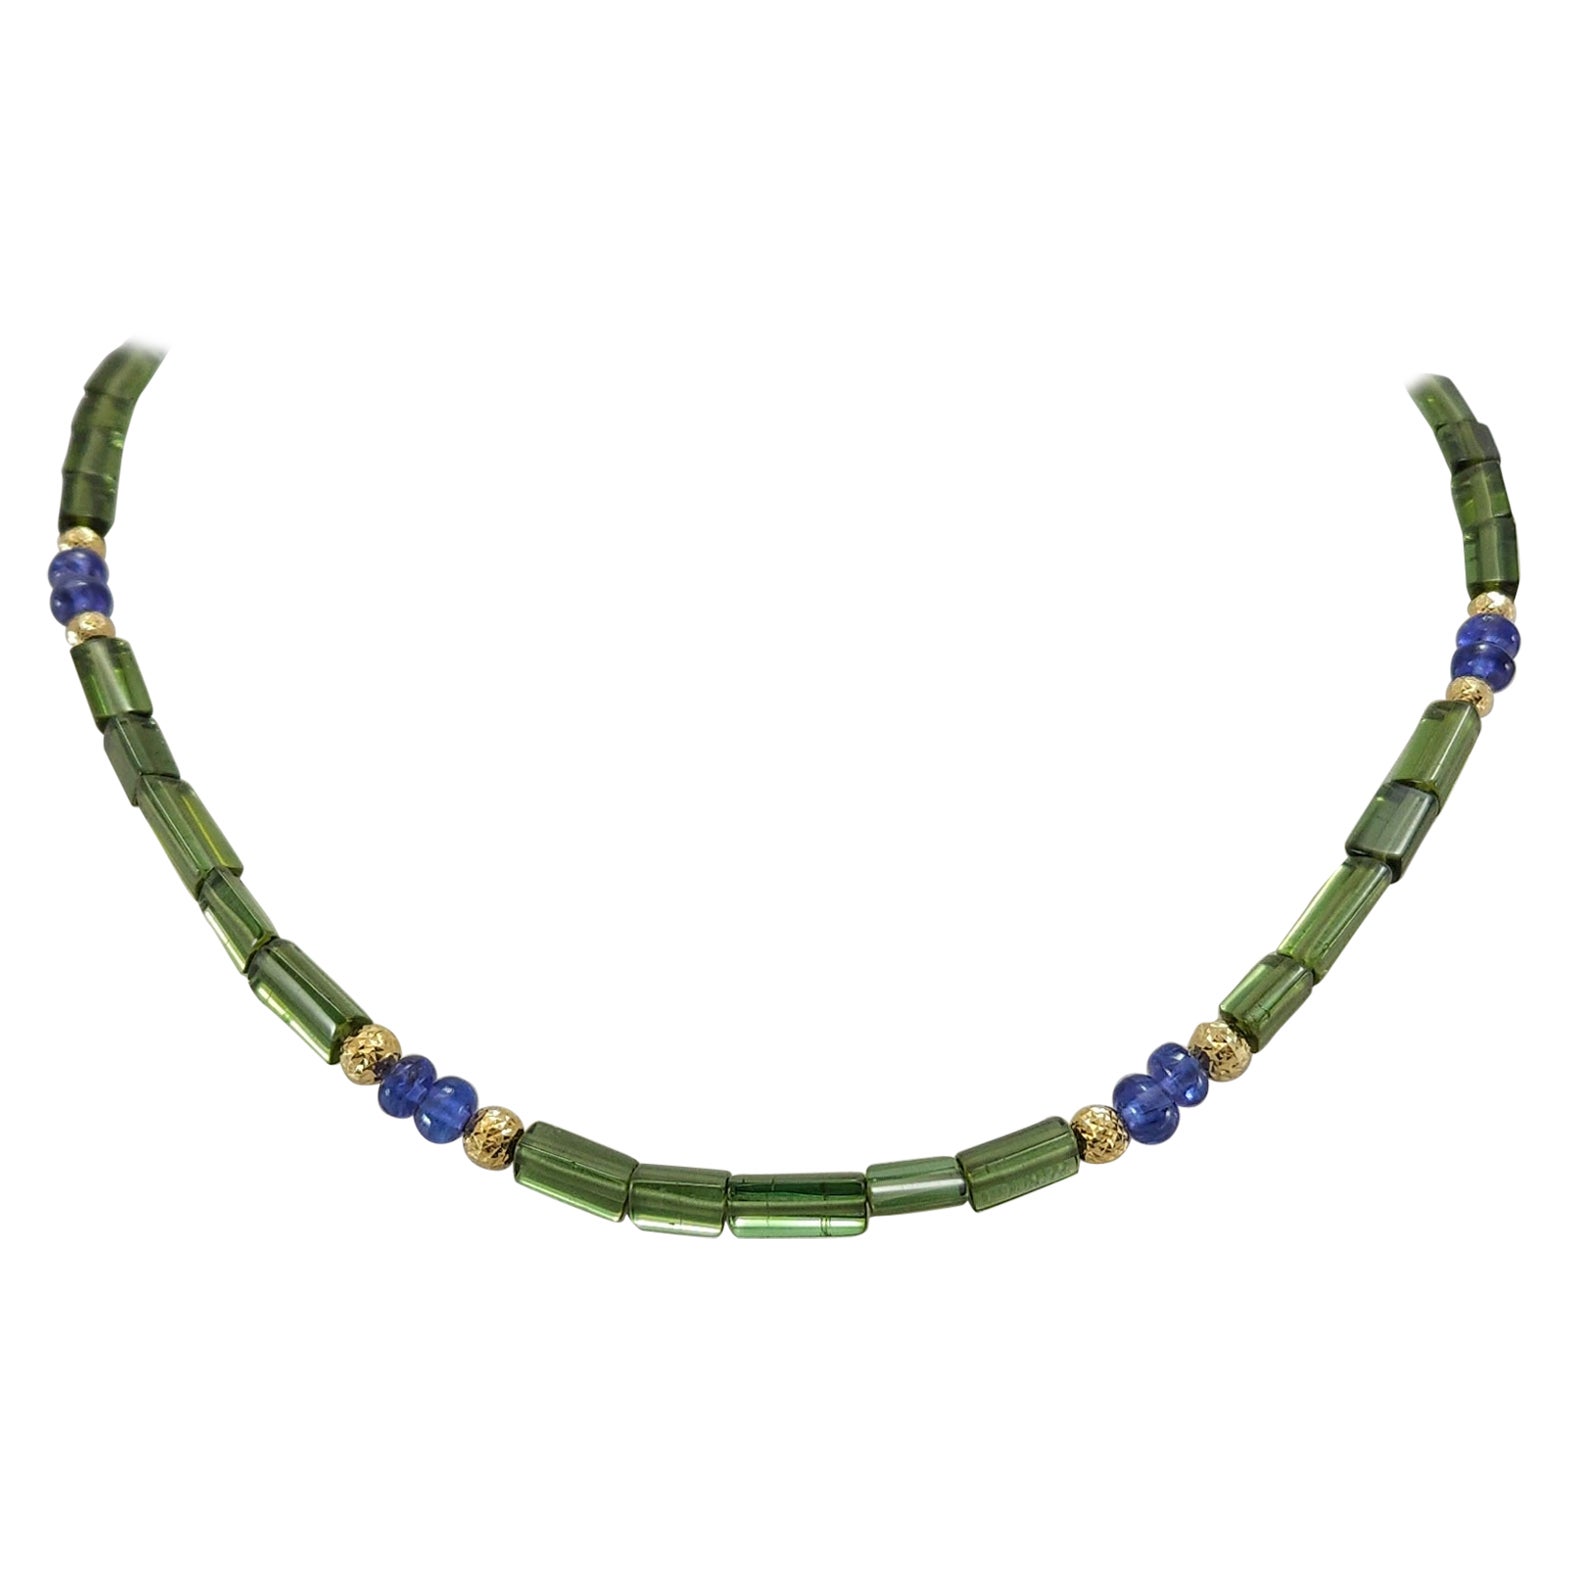 Green Tourmaline Crystal & Tanzanite Beaded Necklace with 18 Carat yellow Gold